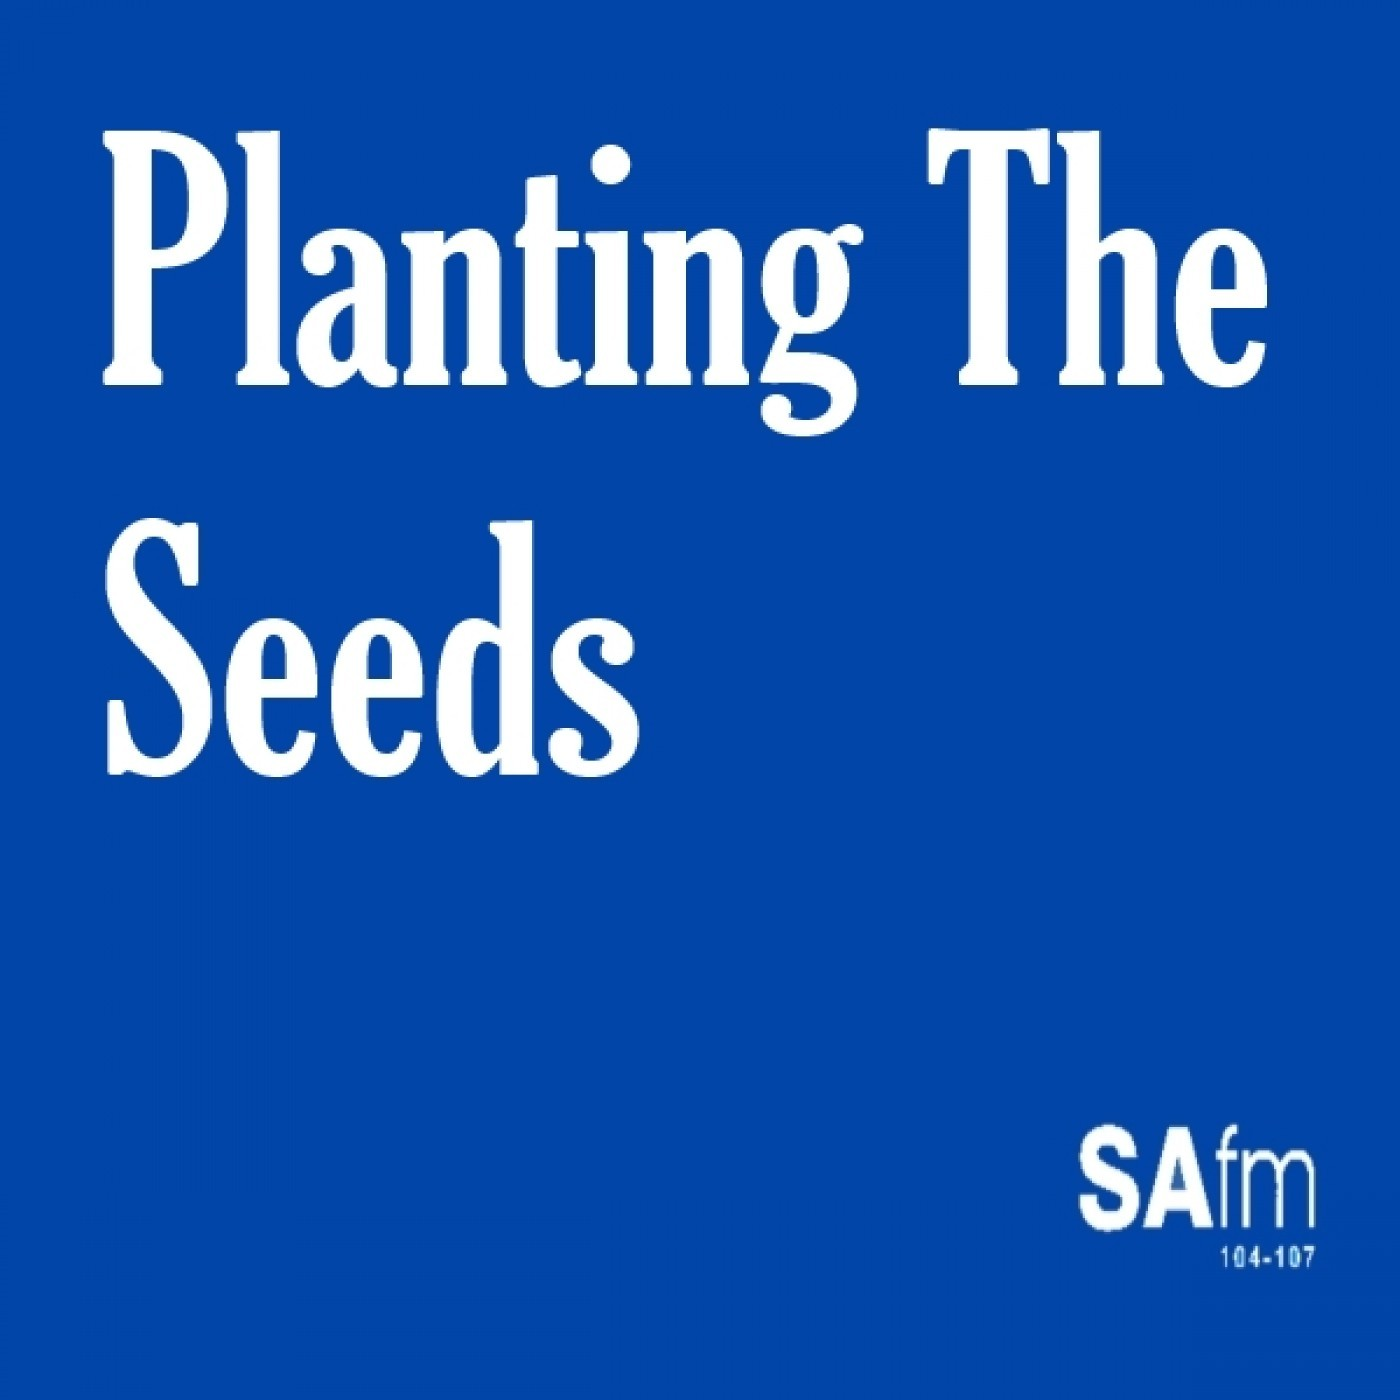 28-03-2019 PLANTING THE SEEDS